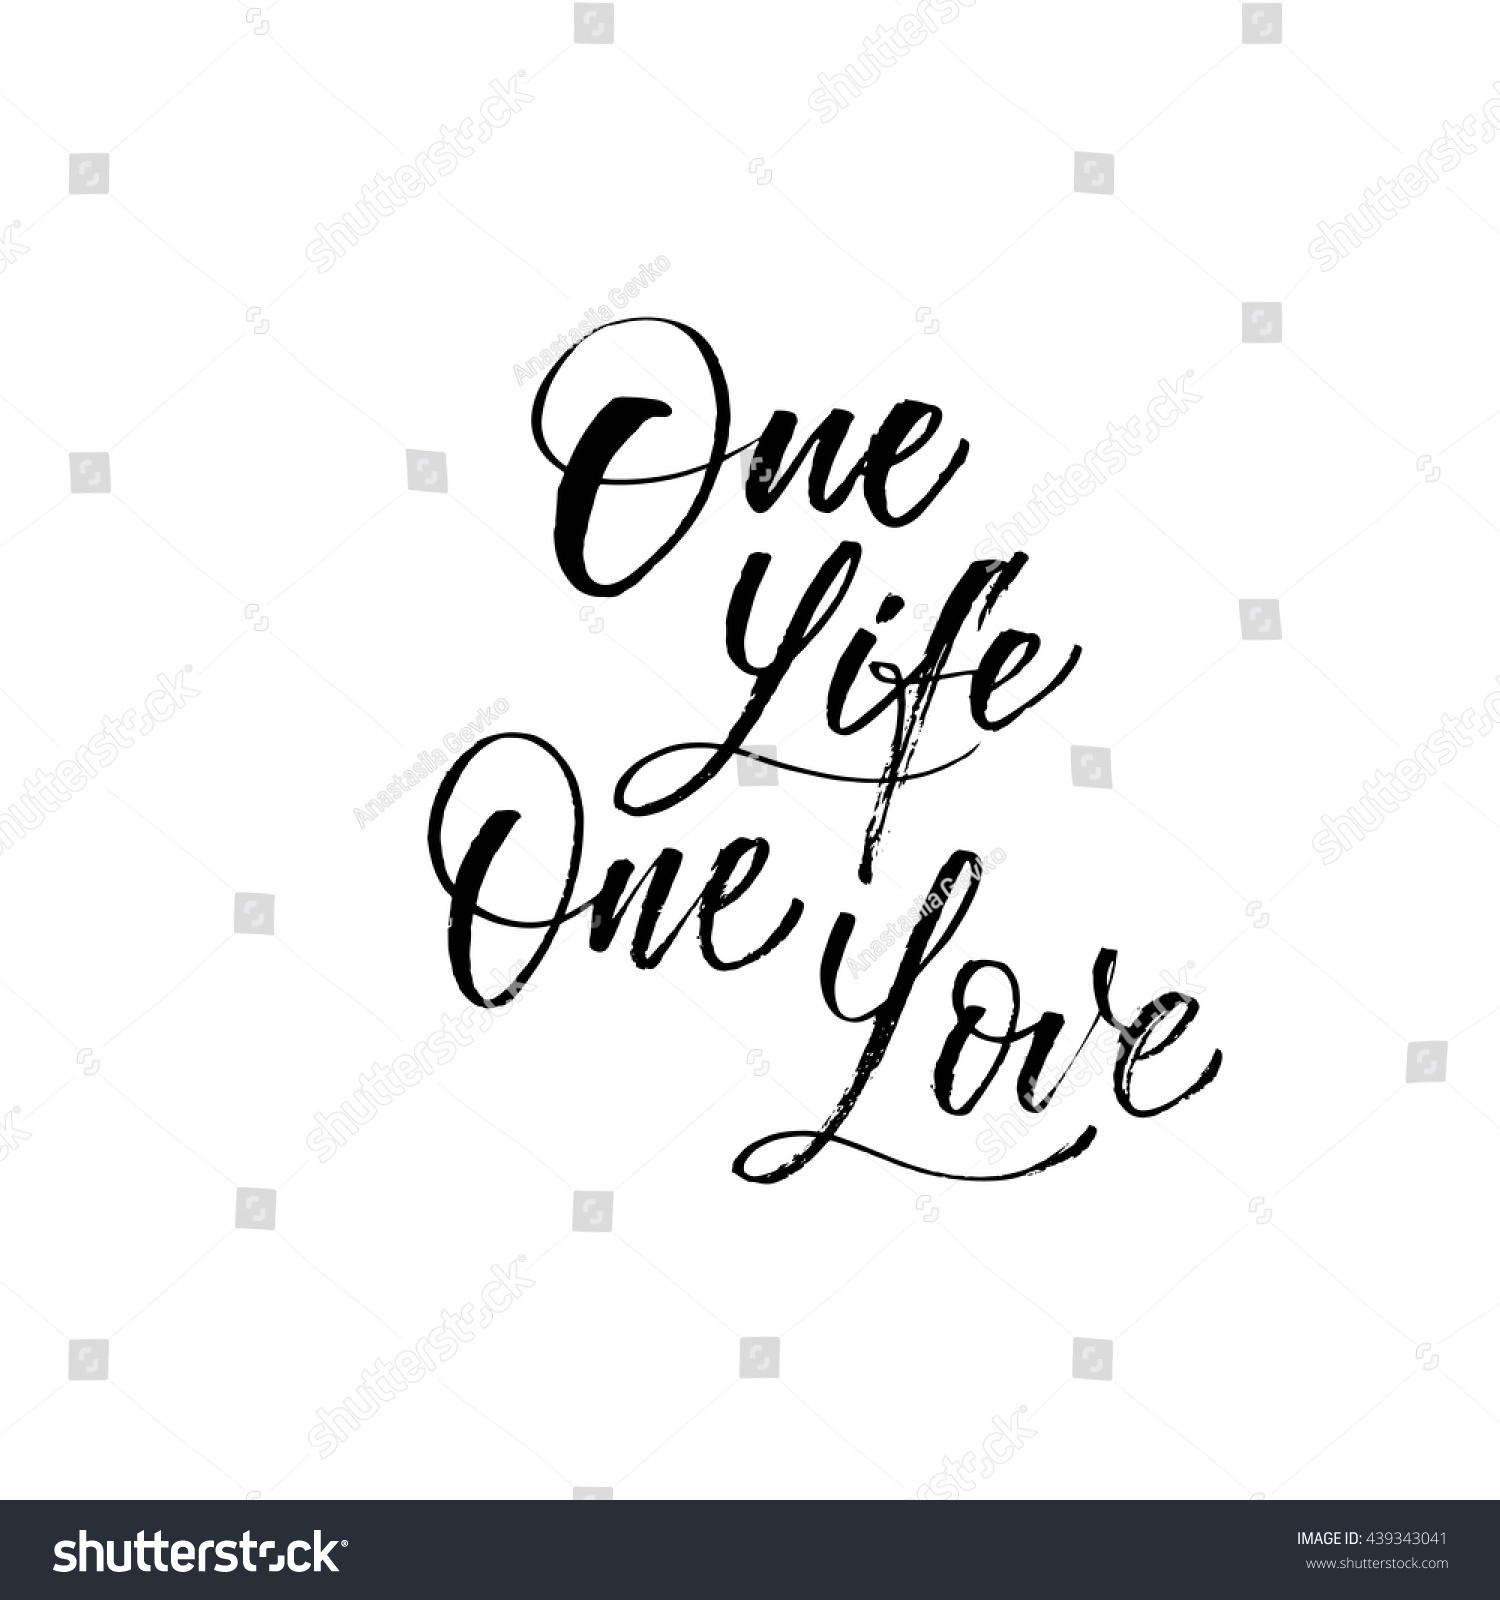 e life one love card Hand drawn inspirational quote Ink illustration Modern